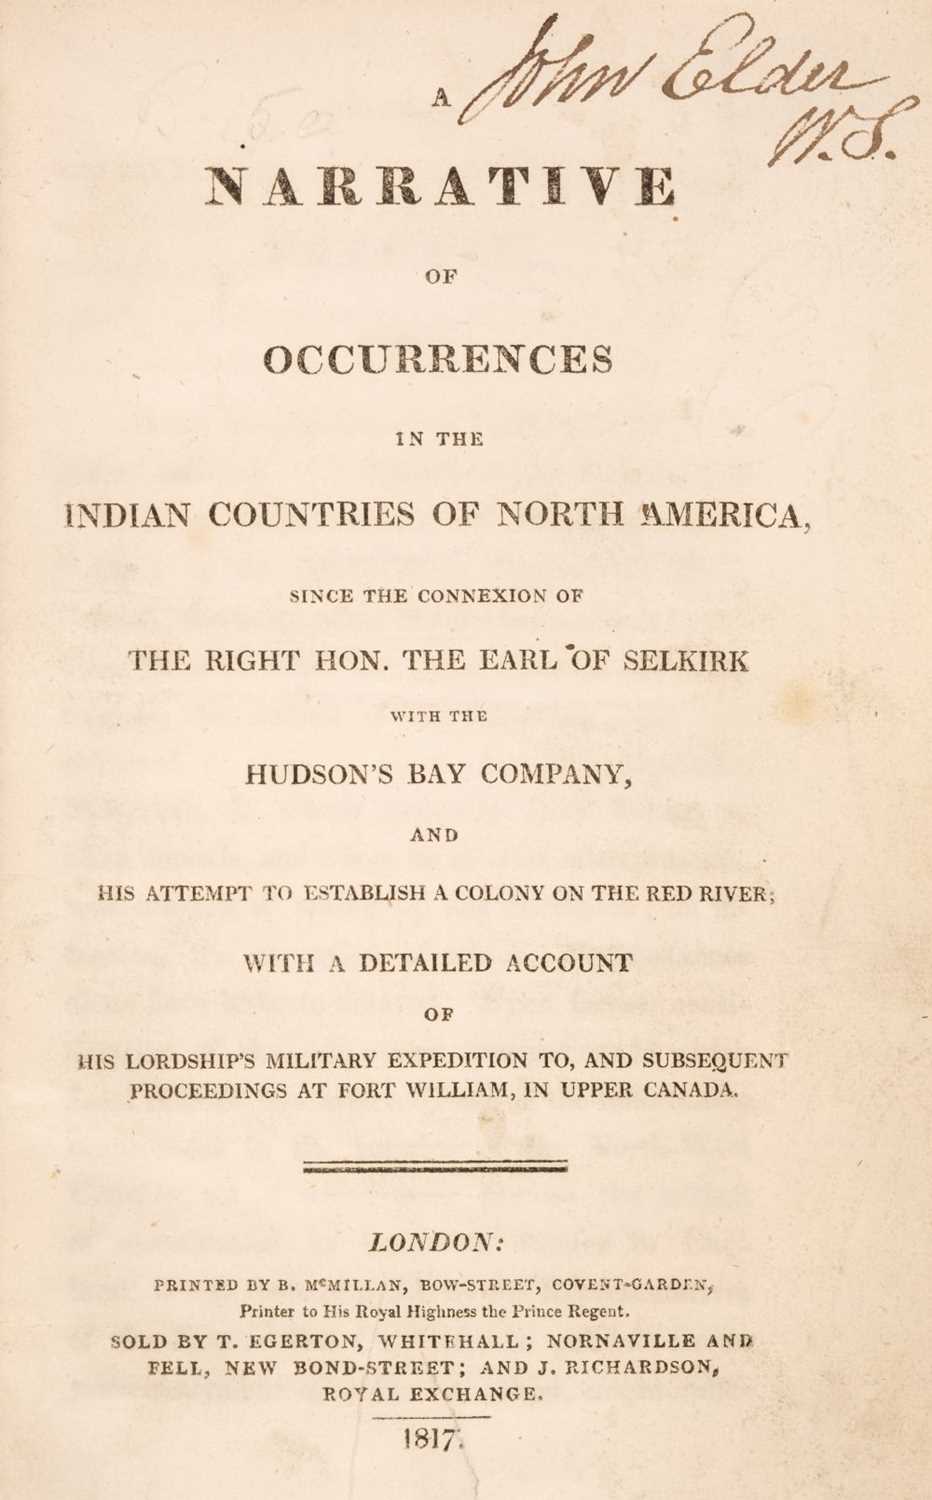 Lot 222 - [Wilcocke, Samuel Hull]. A Narrative of Occurences in the Indian Countries of North America, 1817